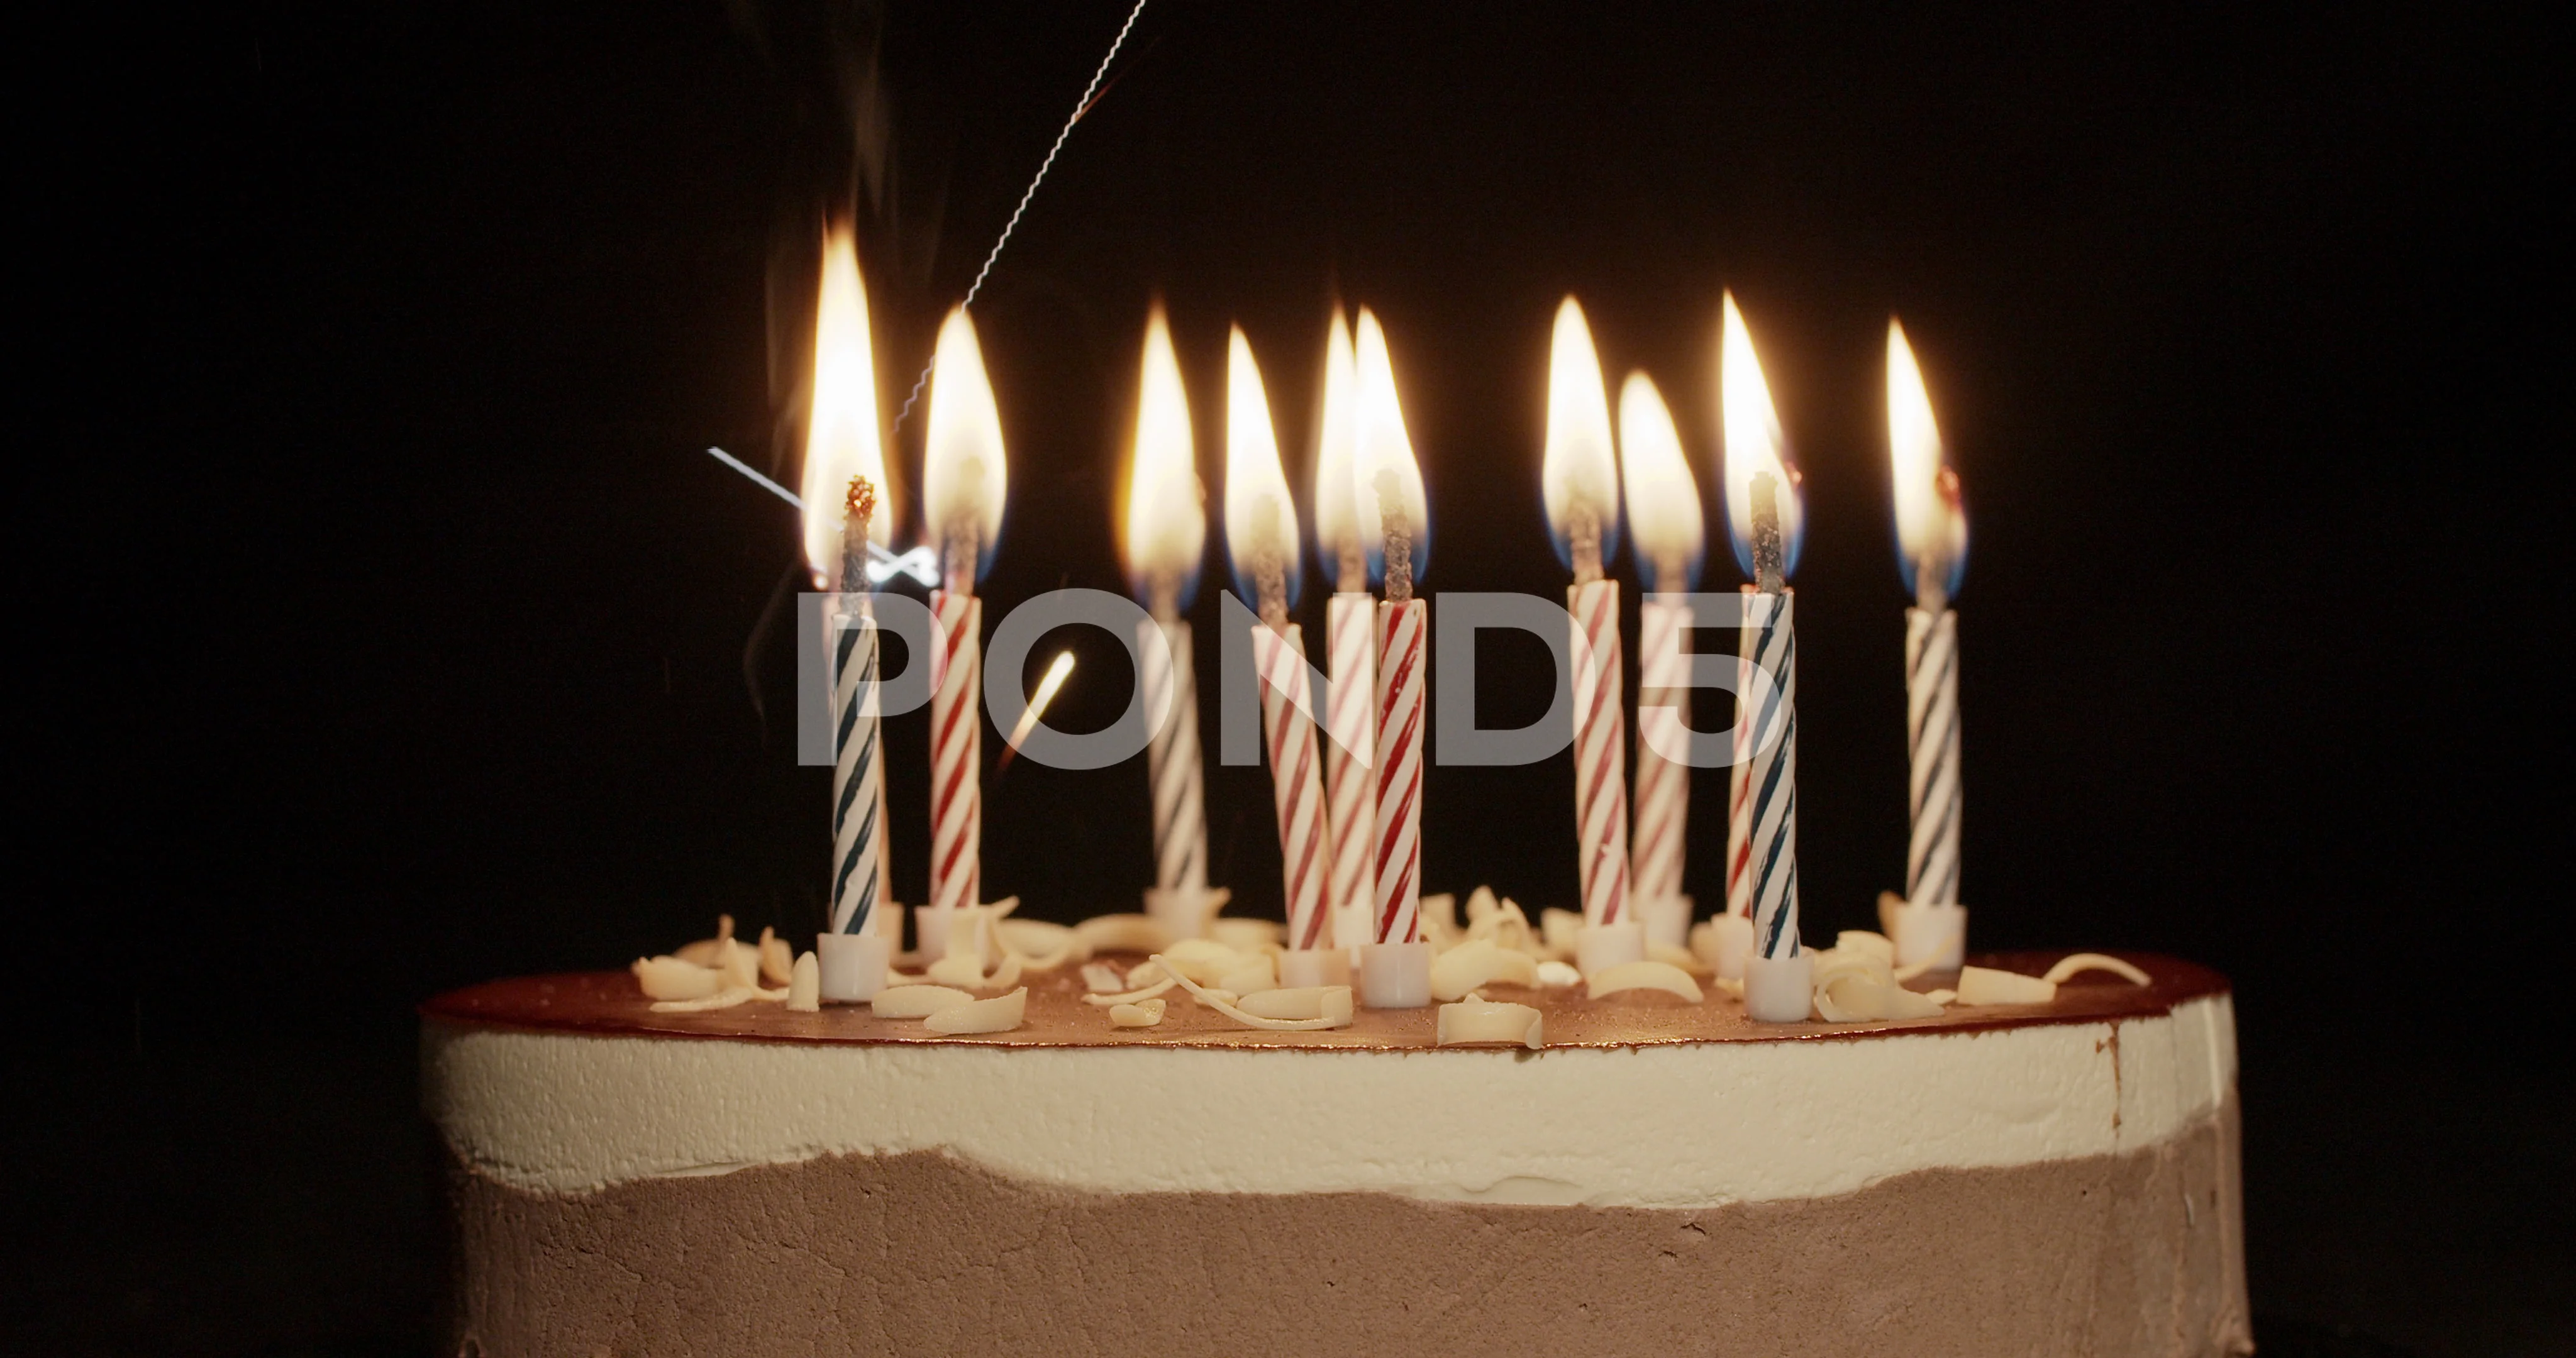 A birthday cake with sparklers and candles photo – Free Candle Image on  Unsplash